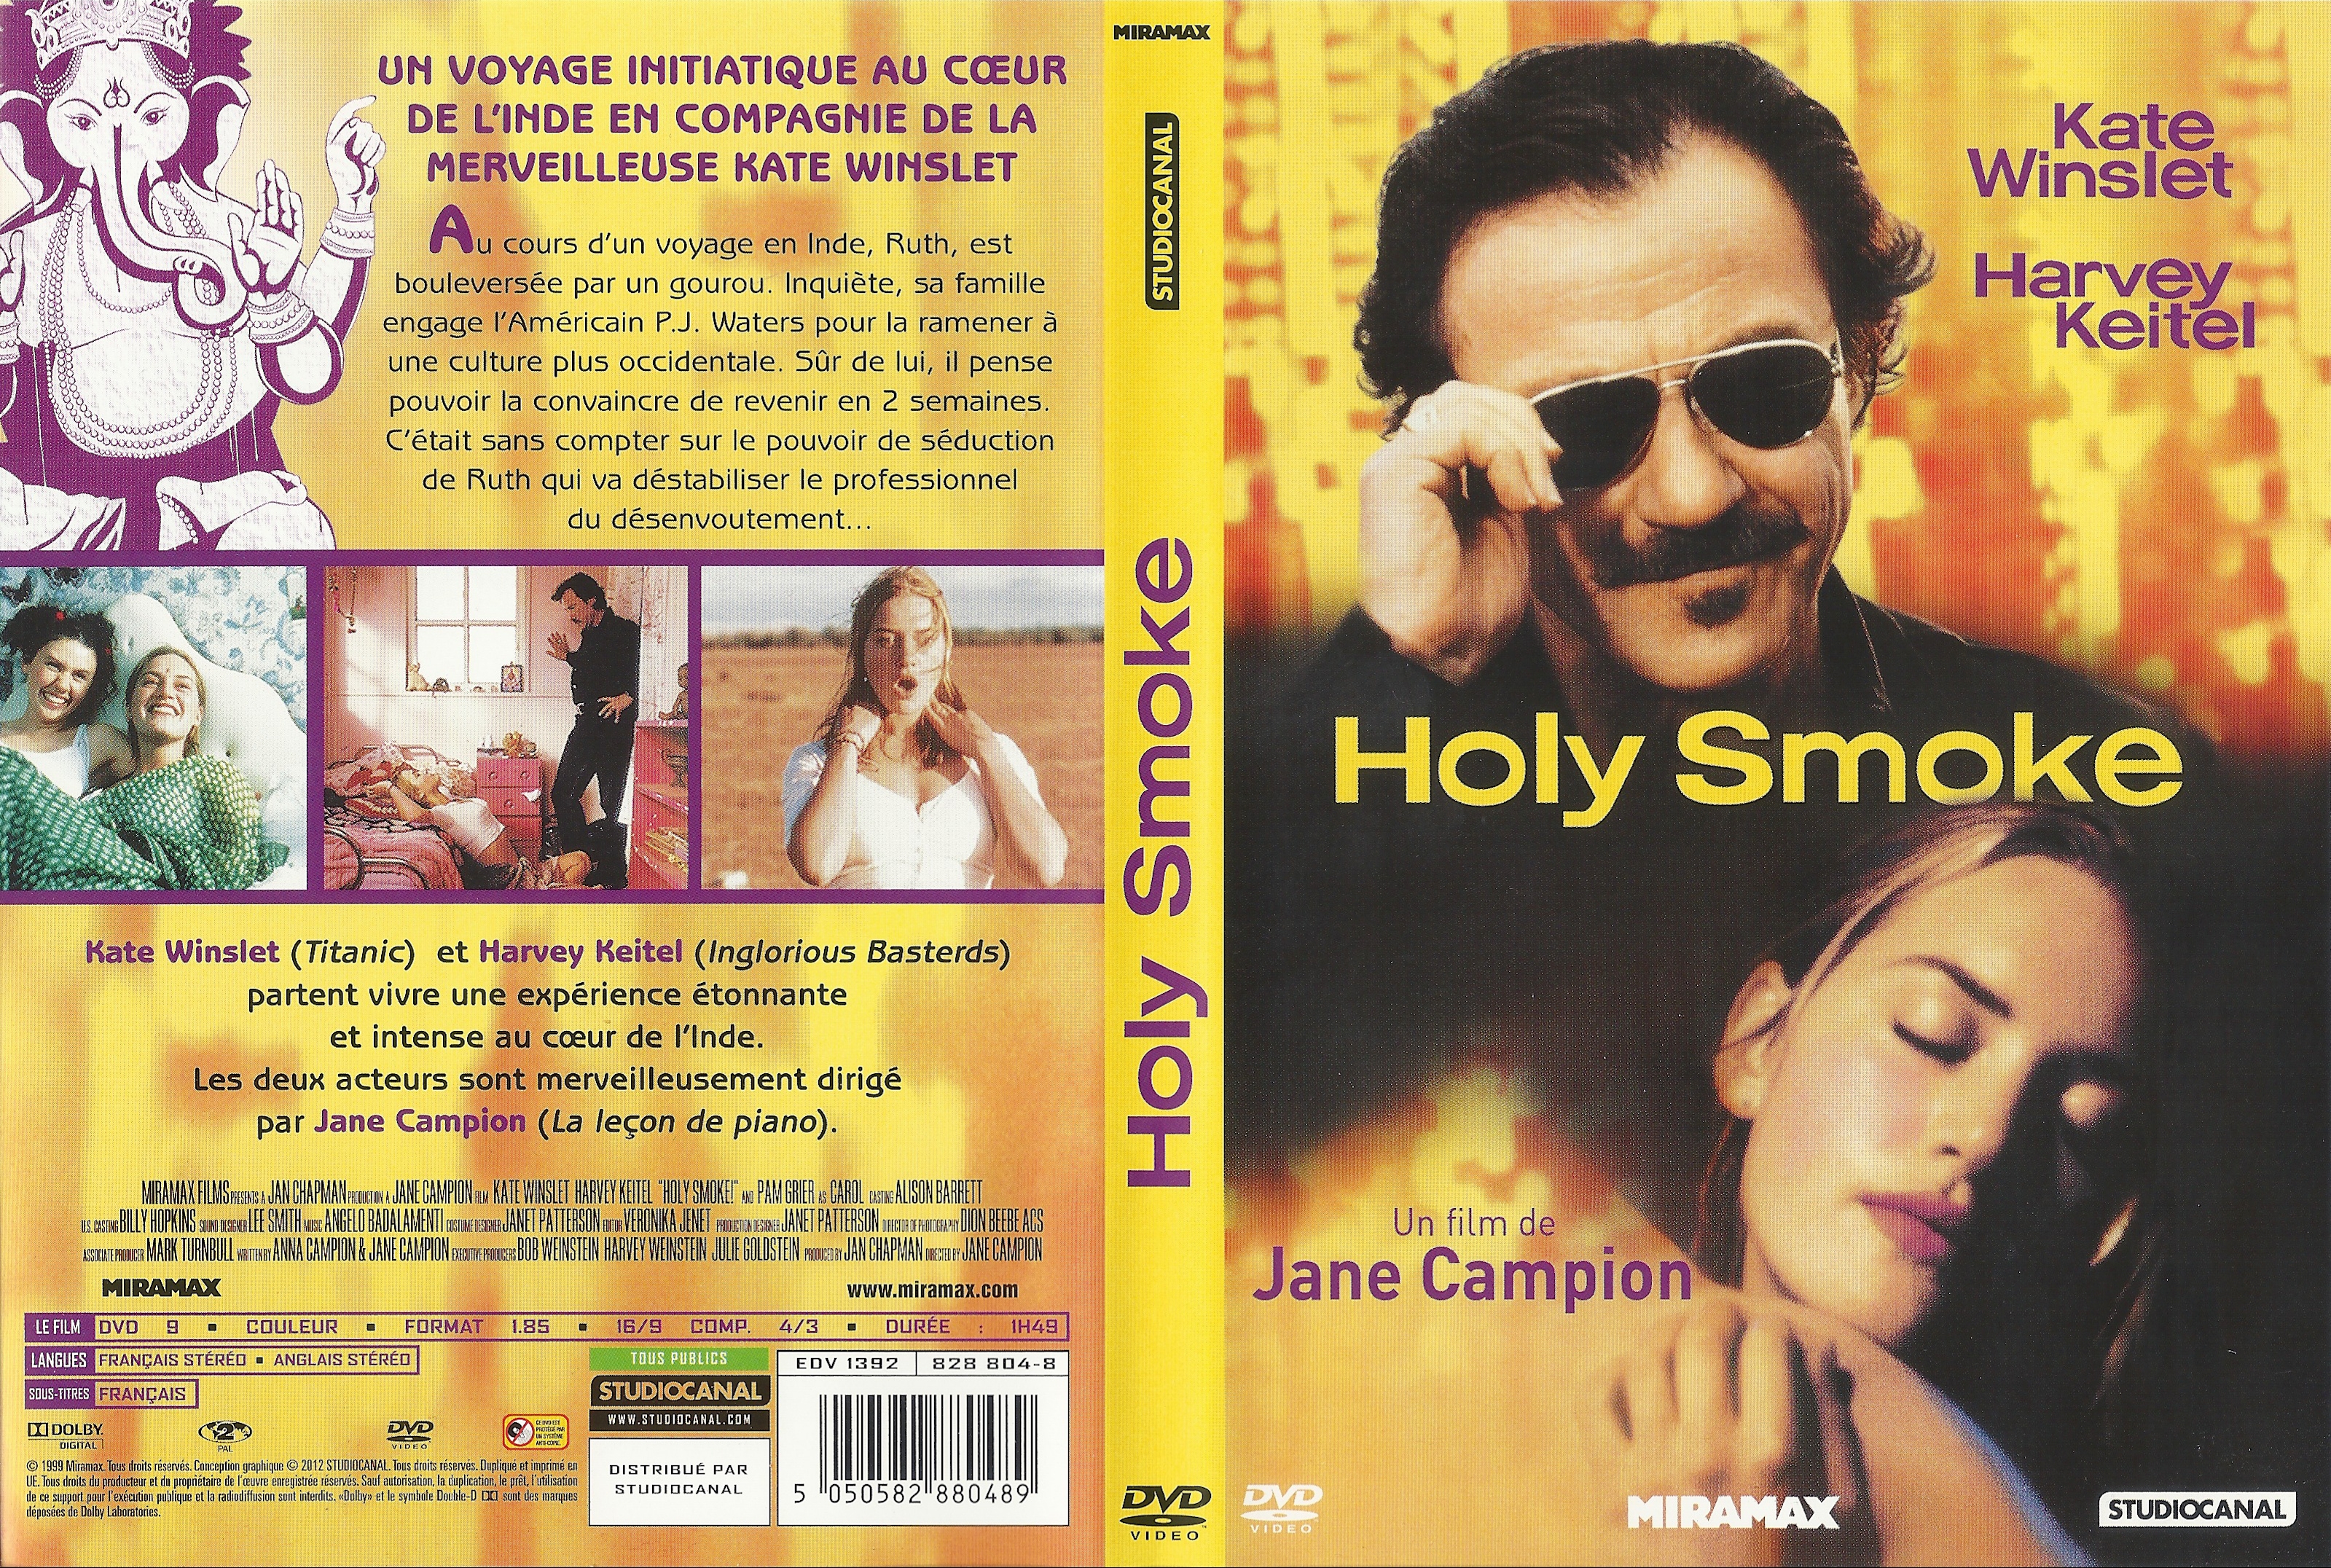 Jaquette DVD Holy Smoke